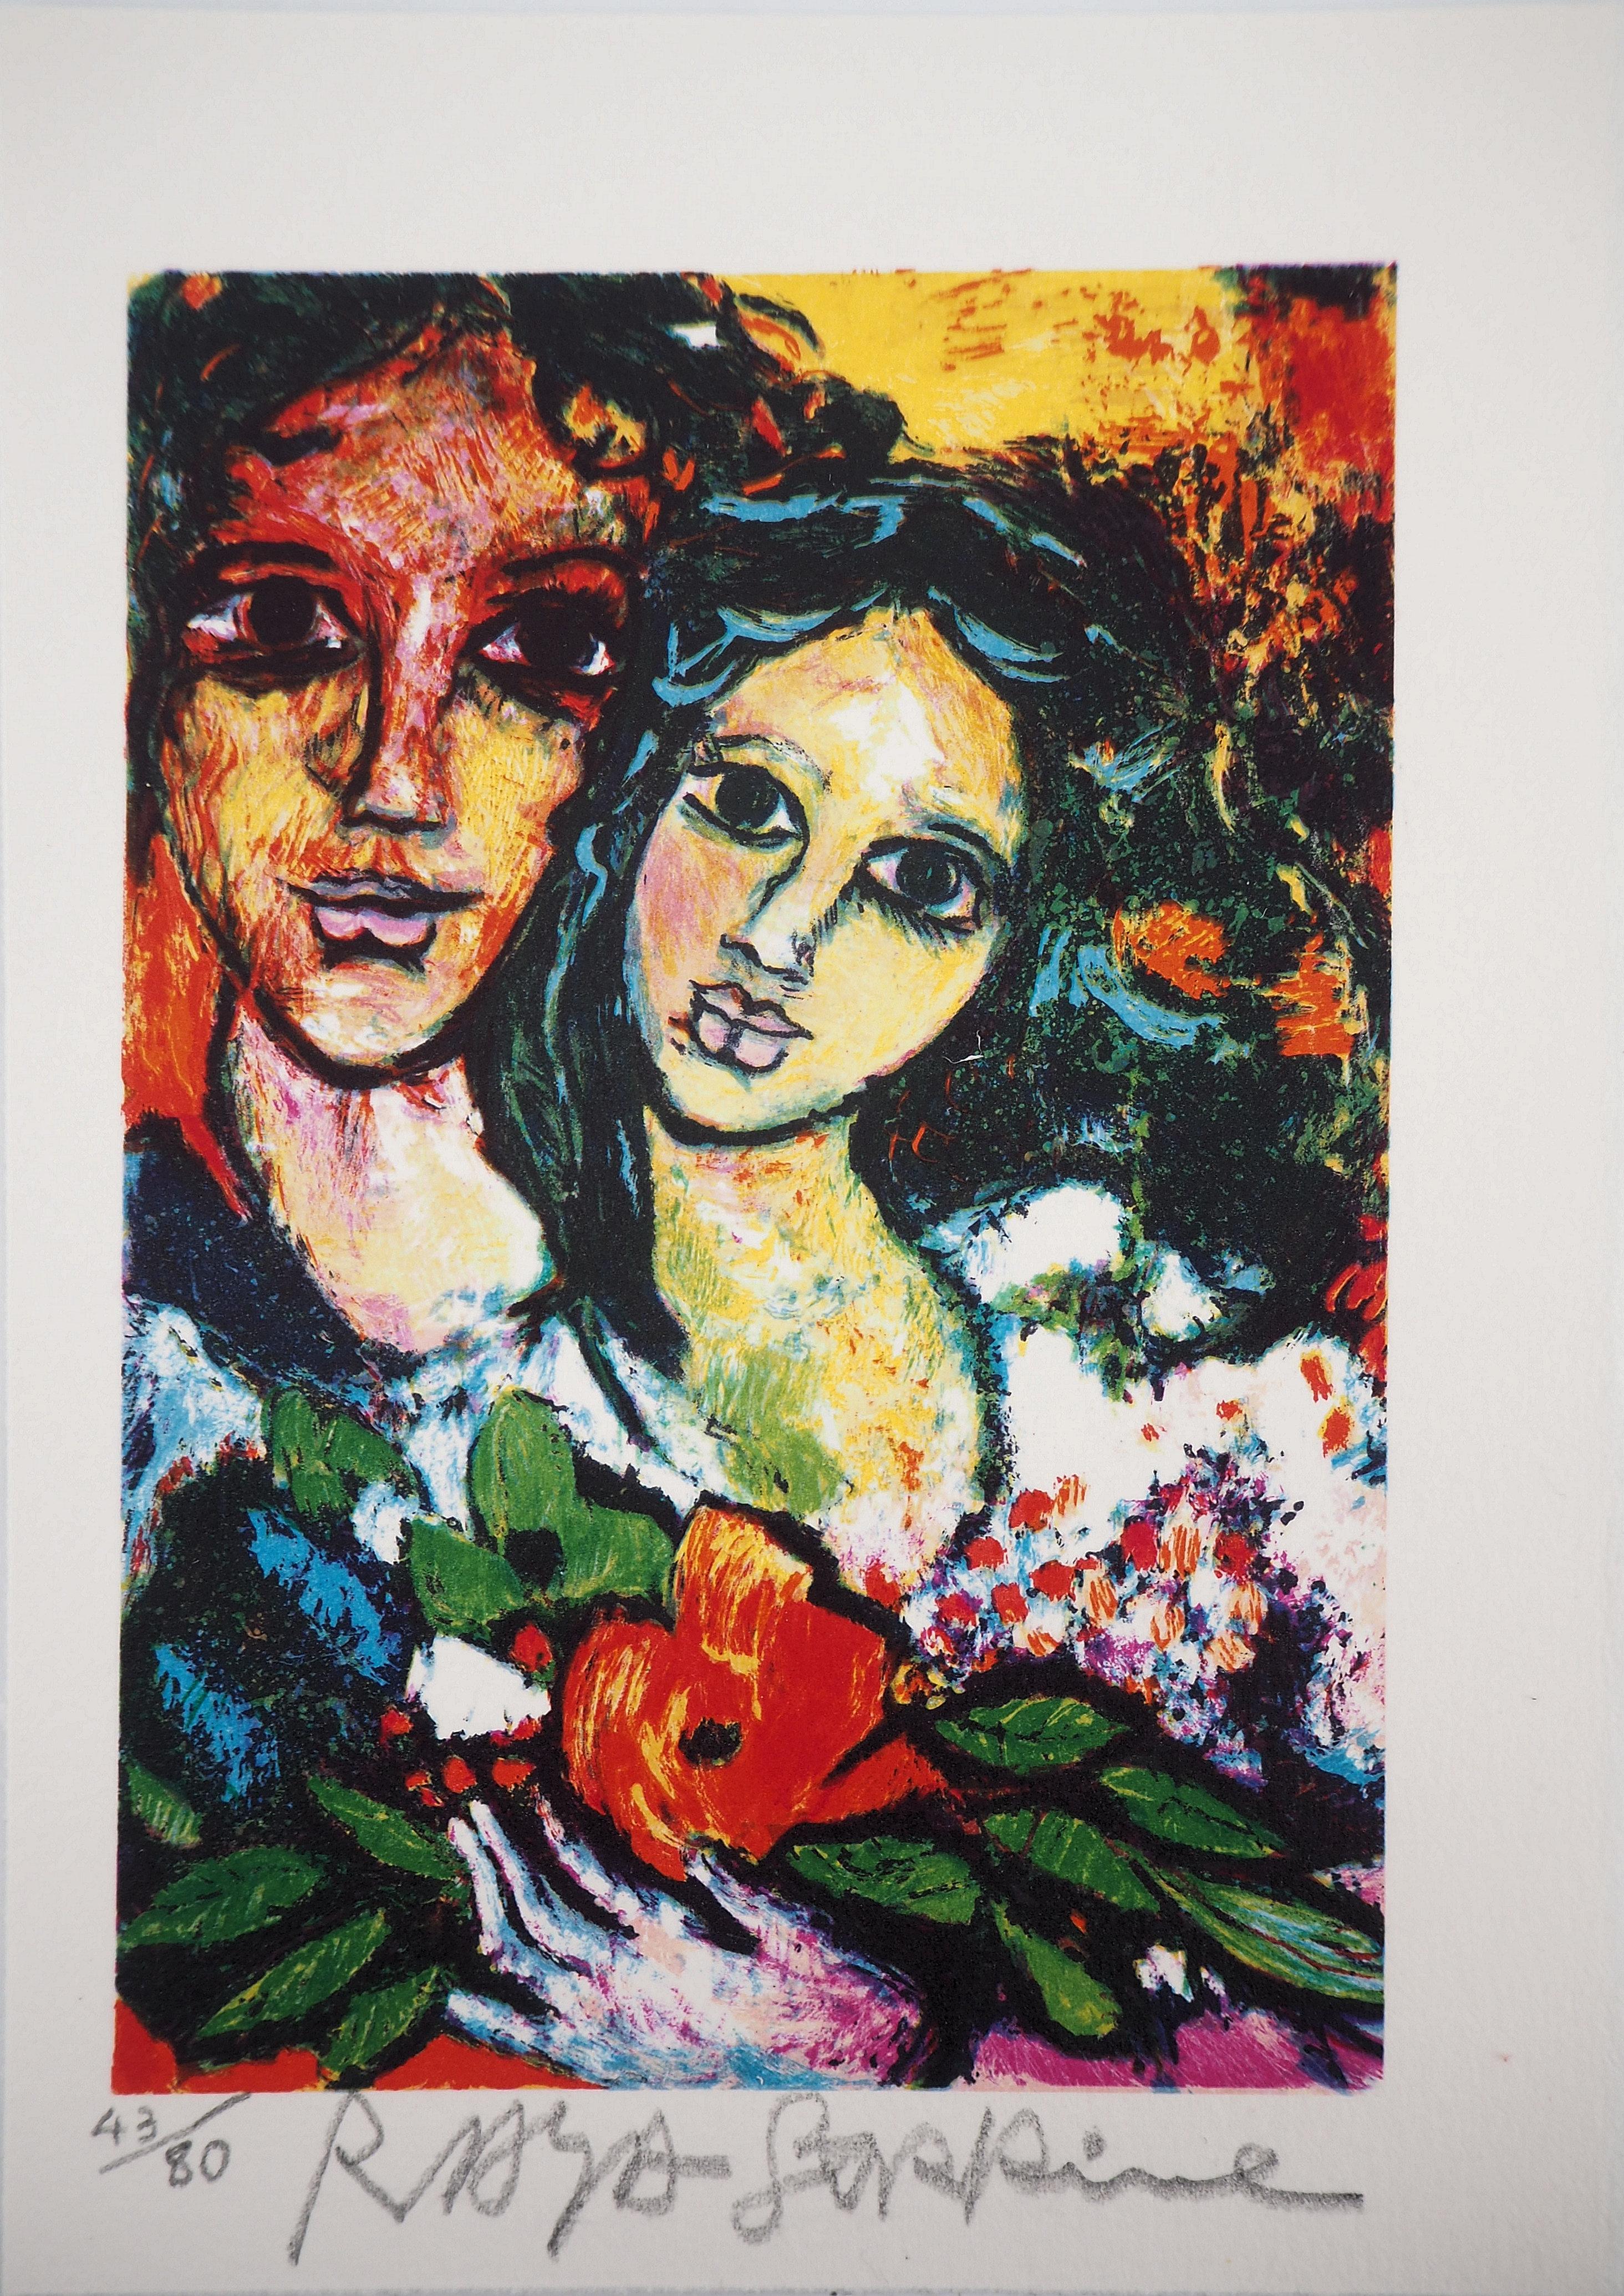 Alain Raya Sorkine Figurative Print - The Lovers with Red Rose - Original signed lithograph - 80 ex